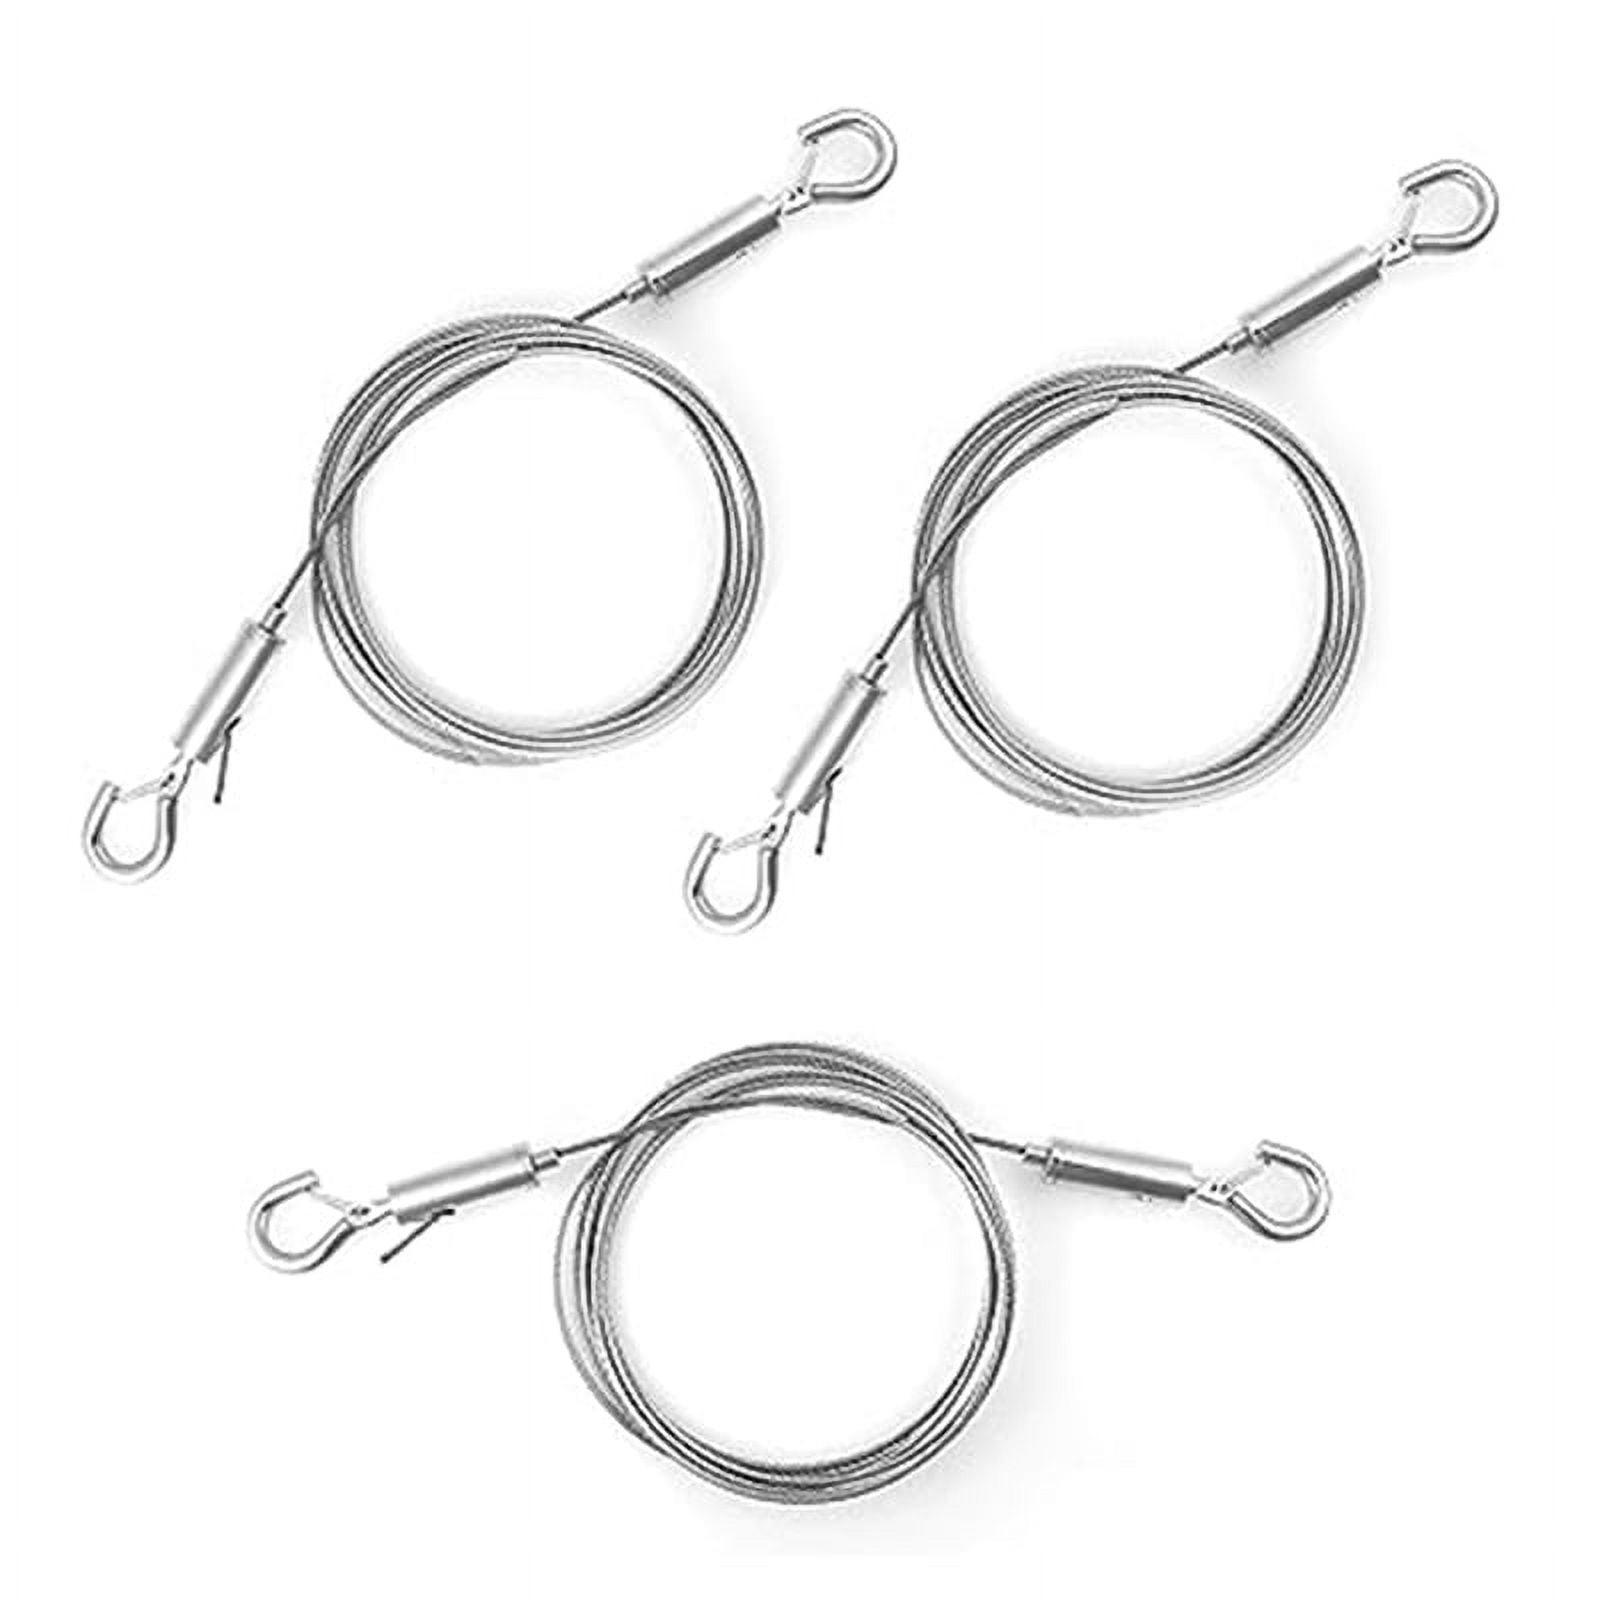 3 Stainless Steel Adjustable Lanyards Clothesline with Hooks Hanging Line  for Picture Frame Planter(Double Hook)